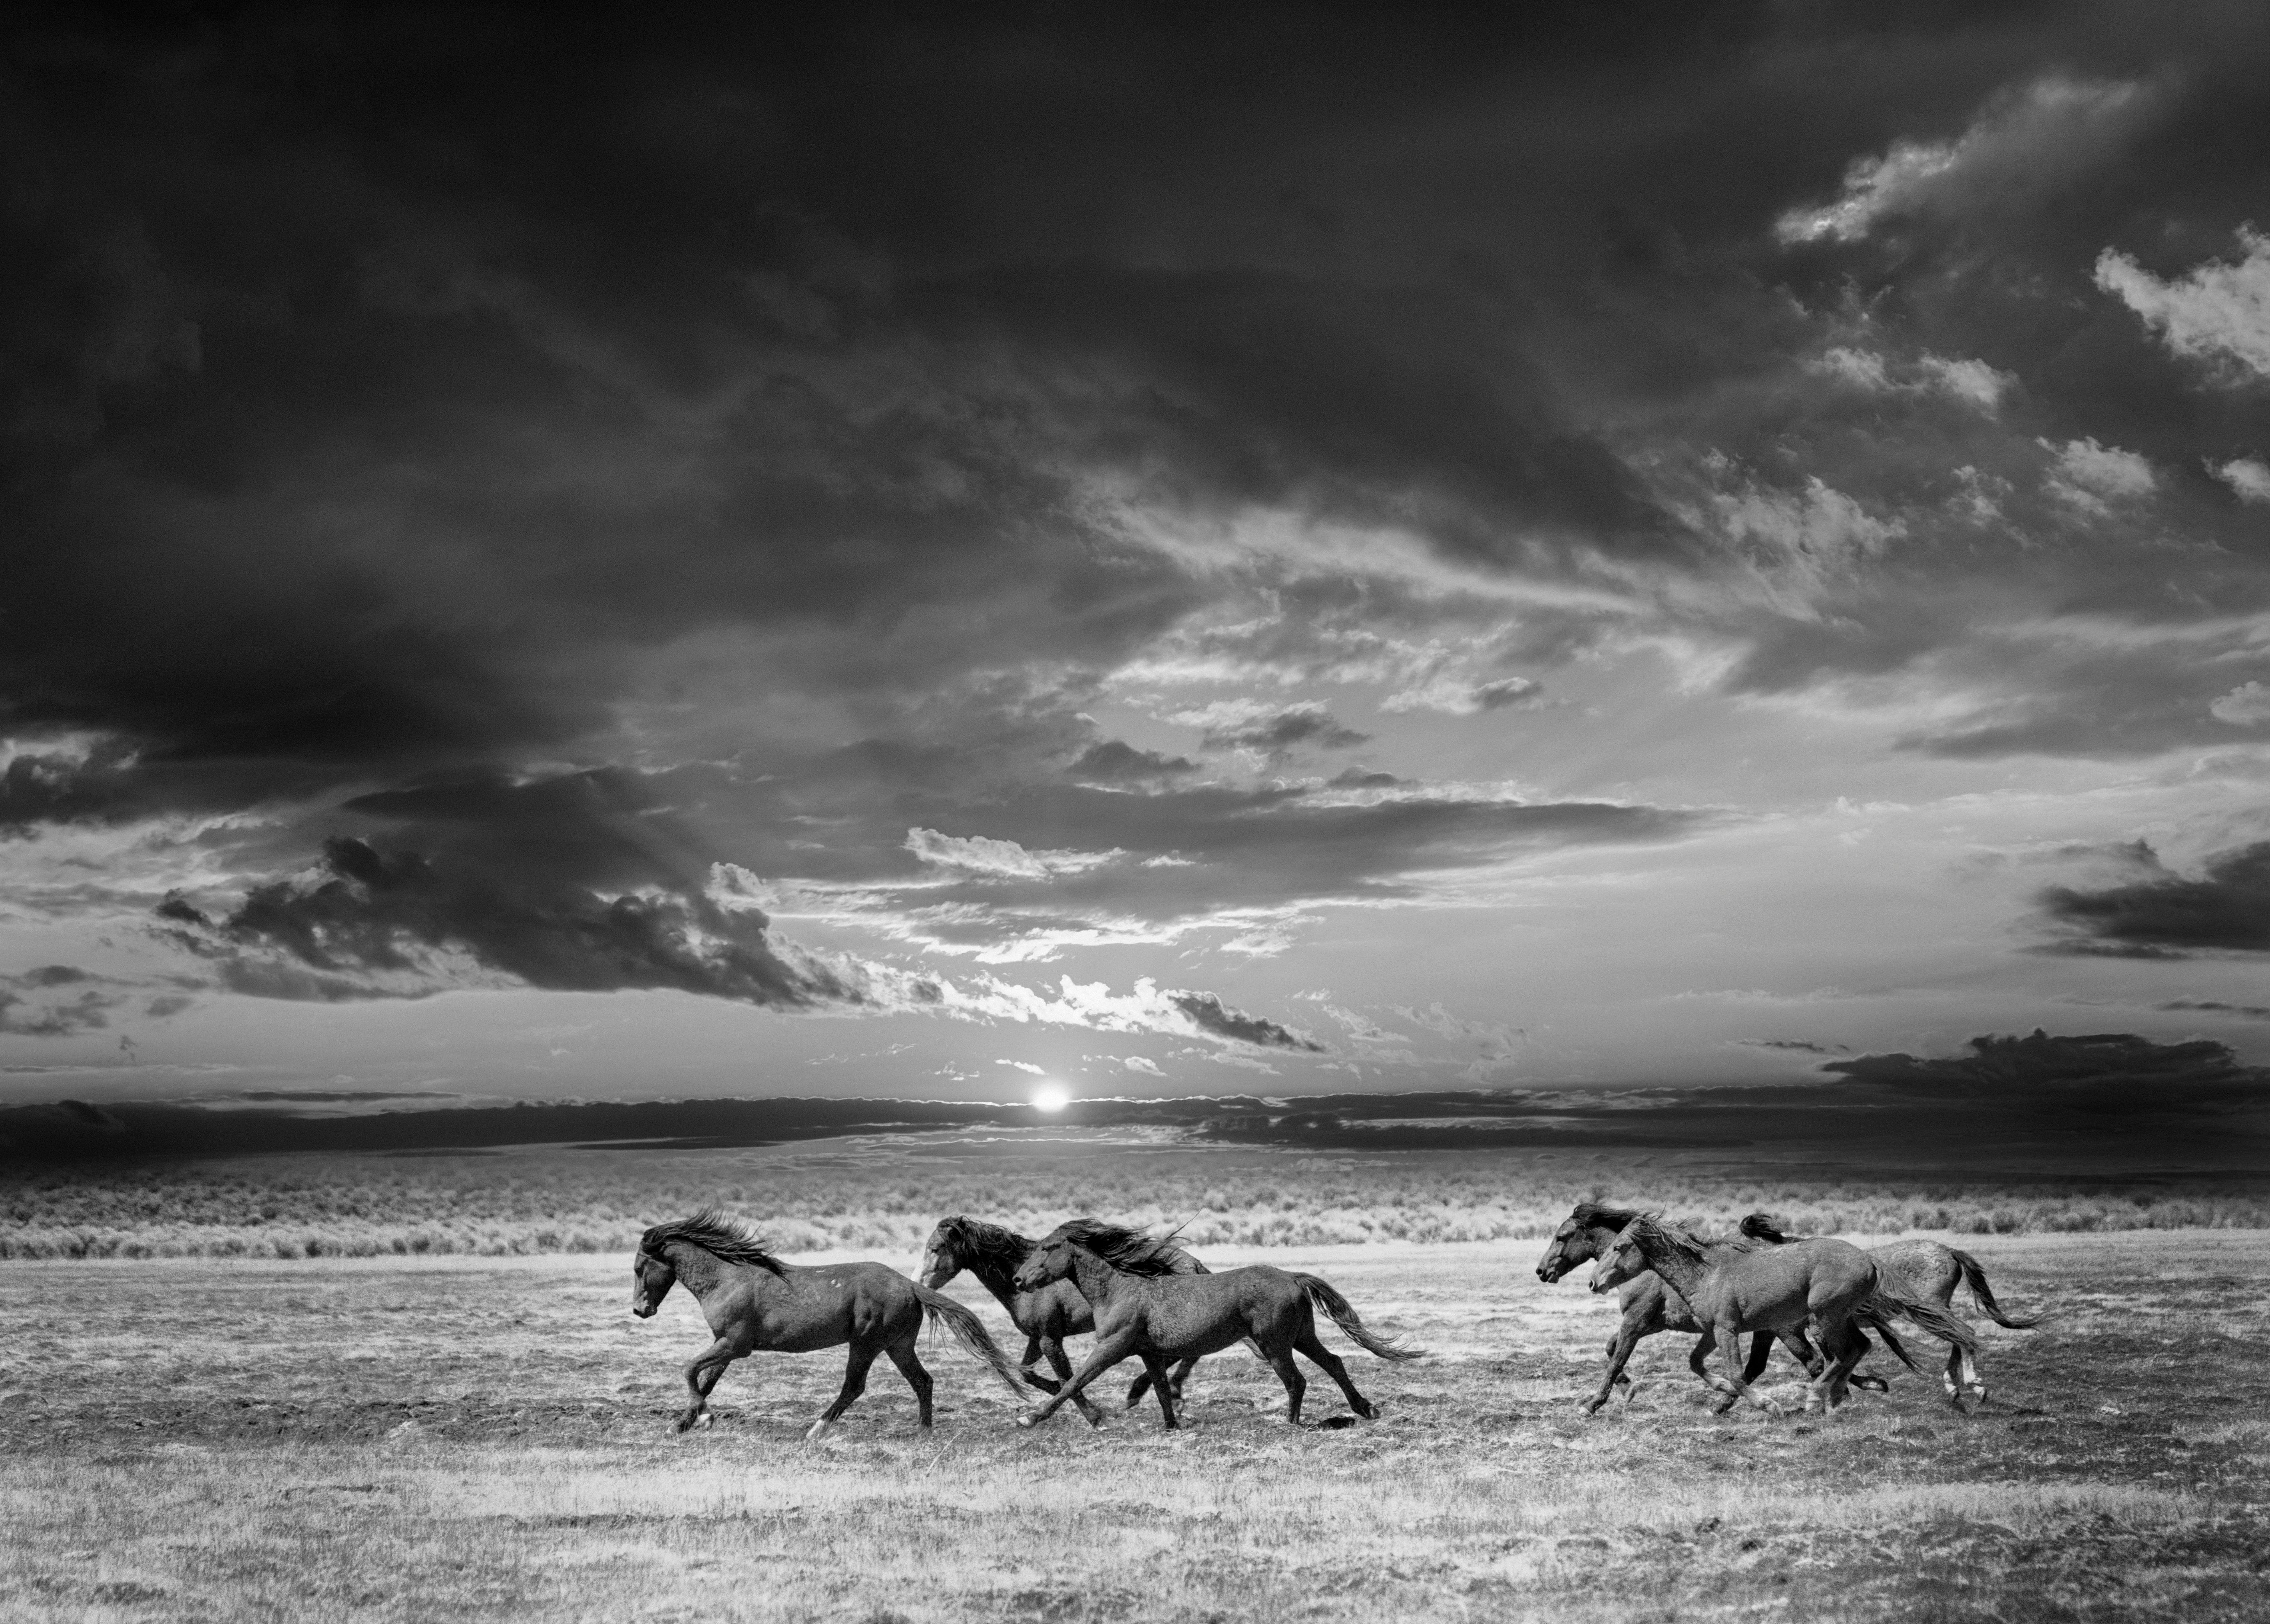 Shane Russeck Black and White Photograph - "Chasing the Light" 60x40 Black & White Photography of Wild Horses Photograph